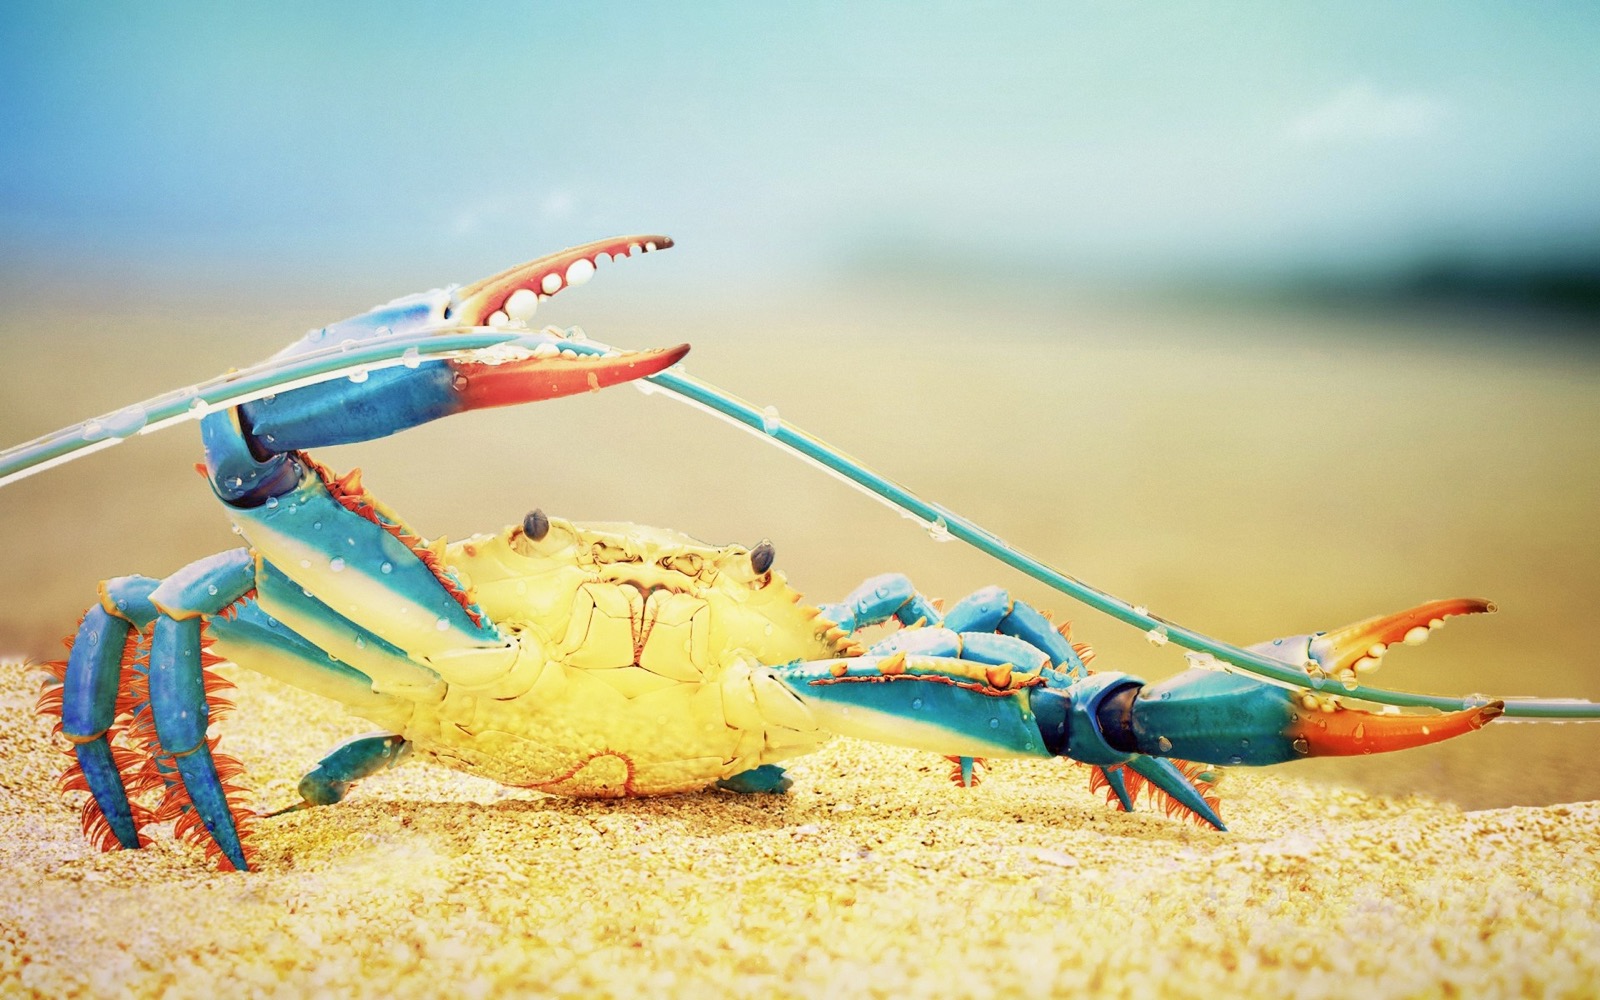 Those with a High IQ Should Have No Problem Passing This Random Knowledge Quiz Crustacean crab